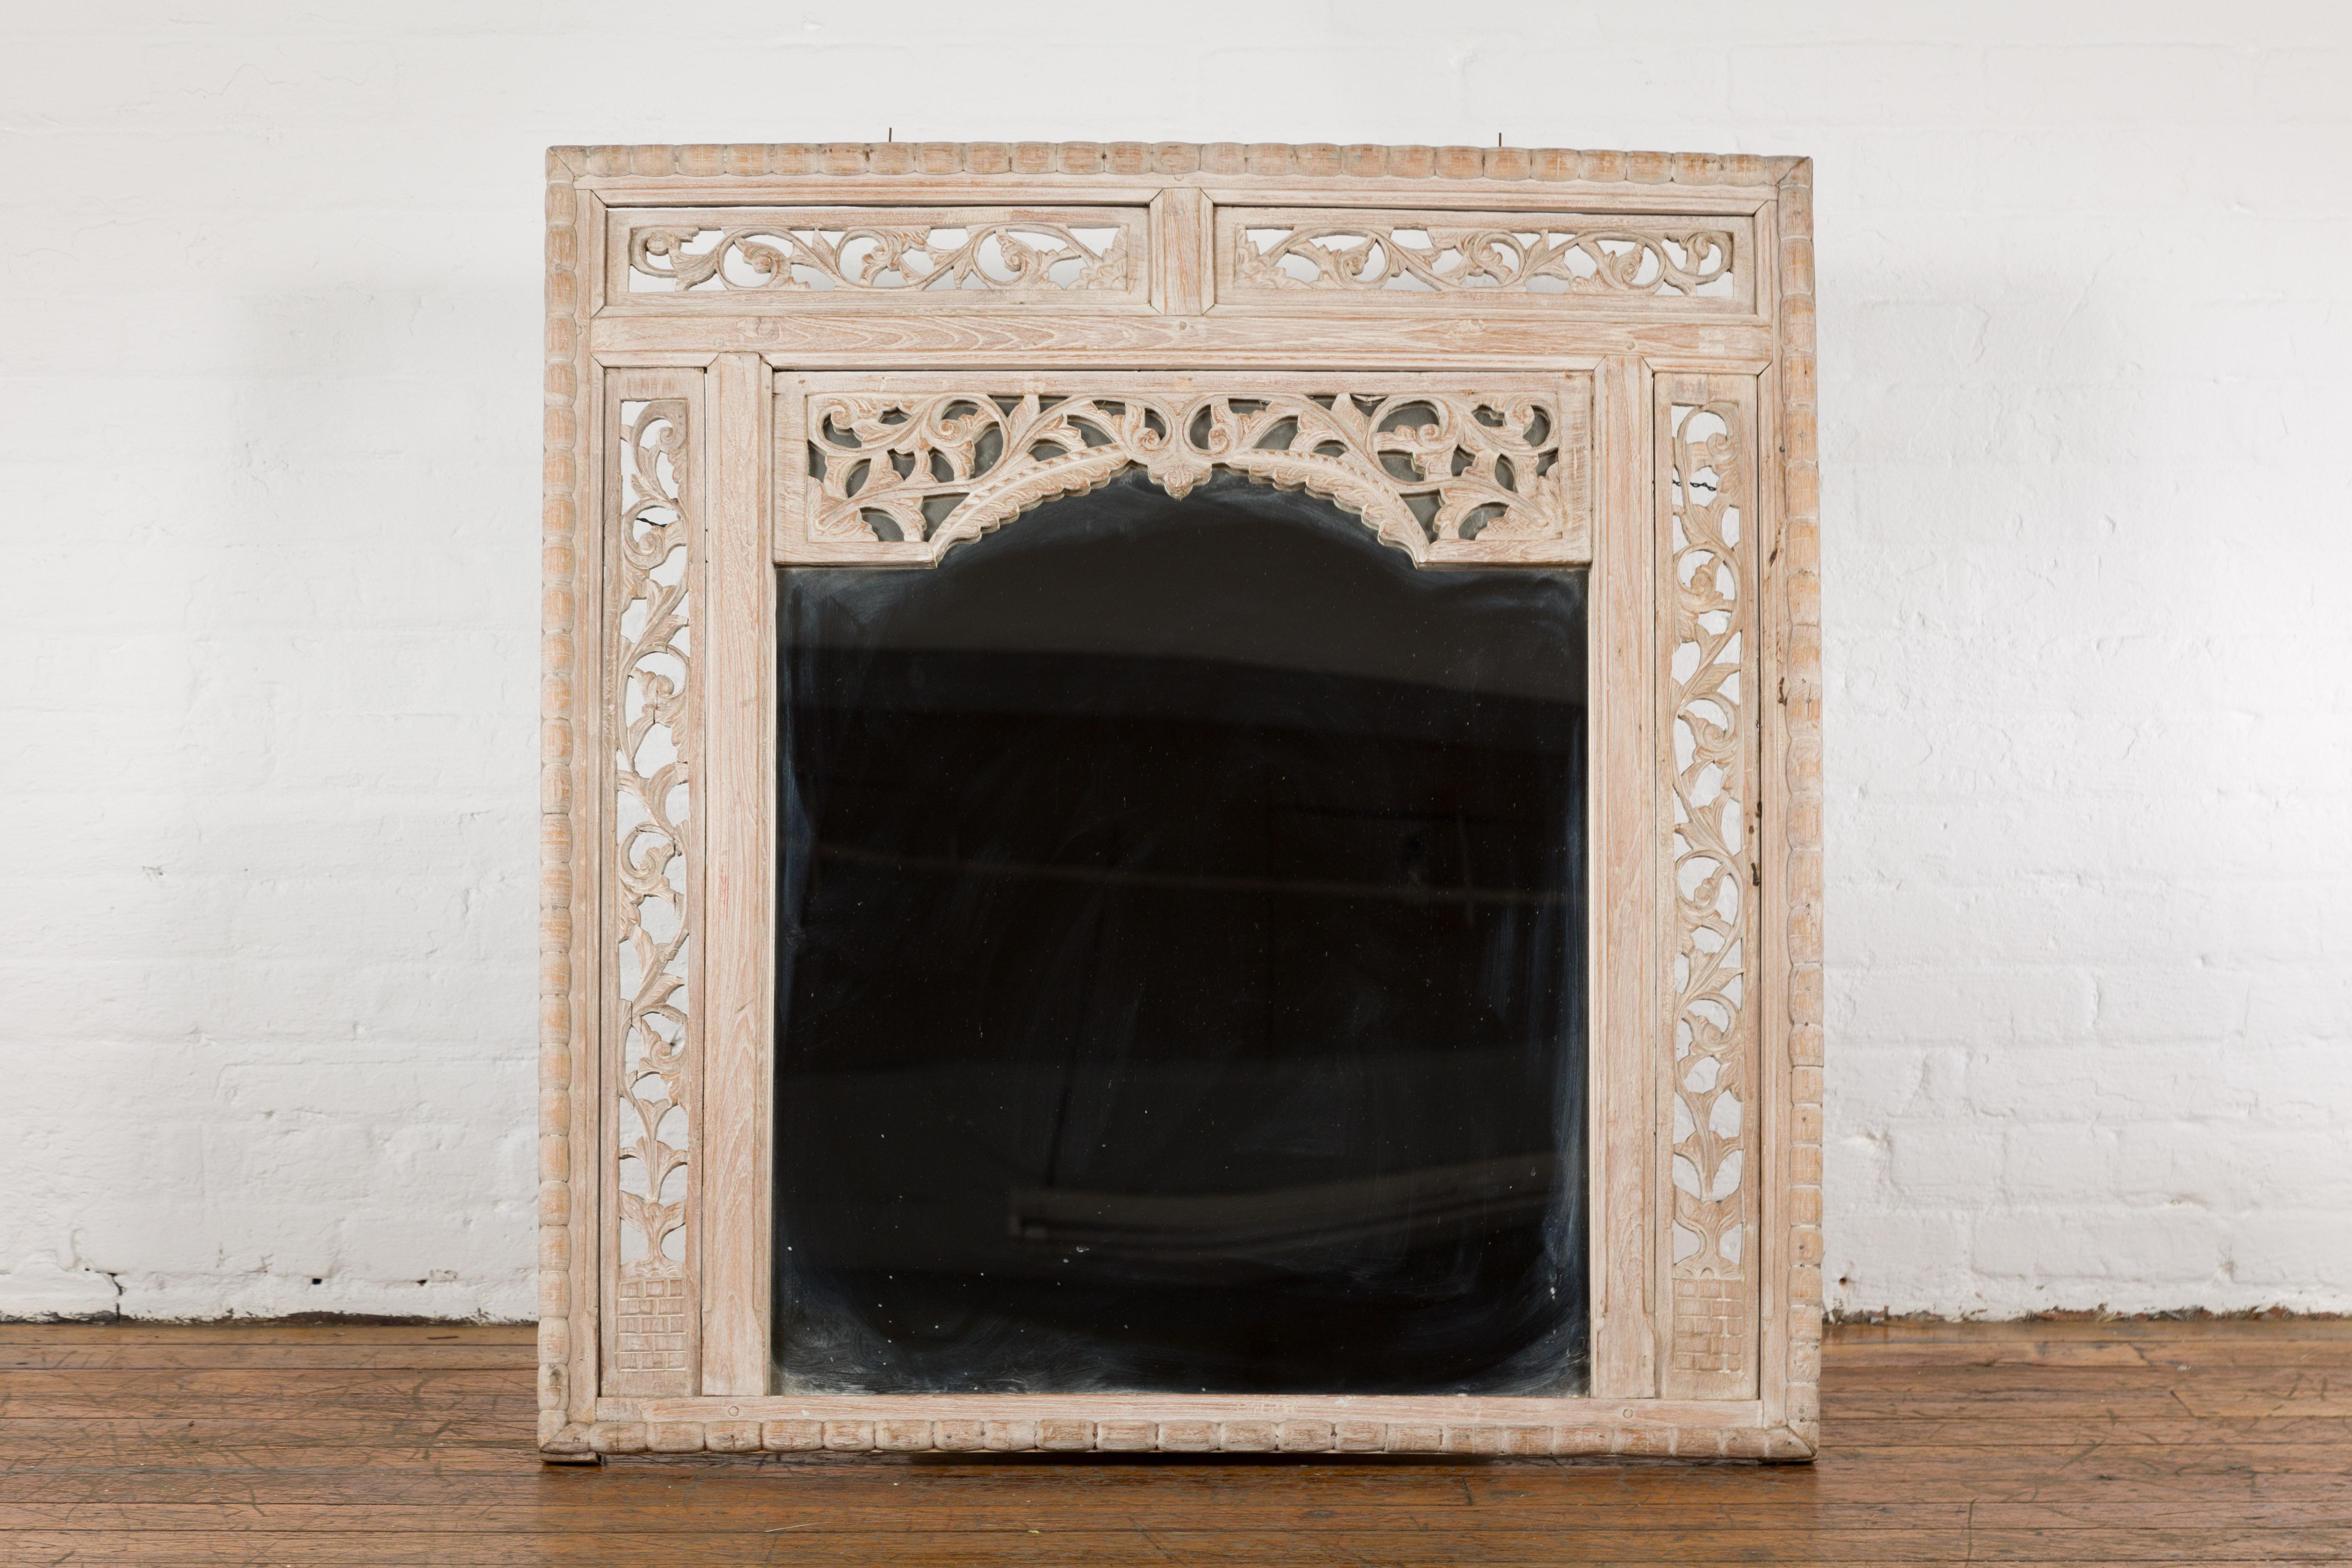 An antique painted Thai mirror from the 19th century, with hand-carved scrolling floral décor. Exuding an air of grace and opulence, this painted Thai mirror from the 19th century beckons us with its hand-carved scrolling floral décor and serene